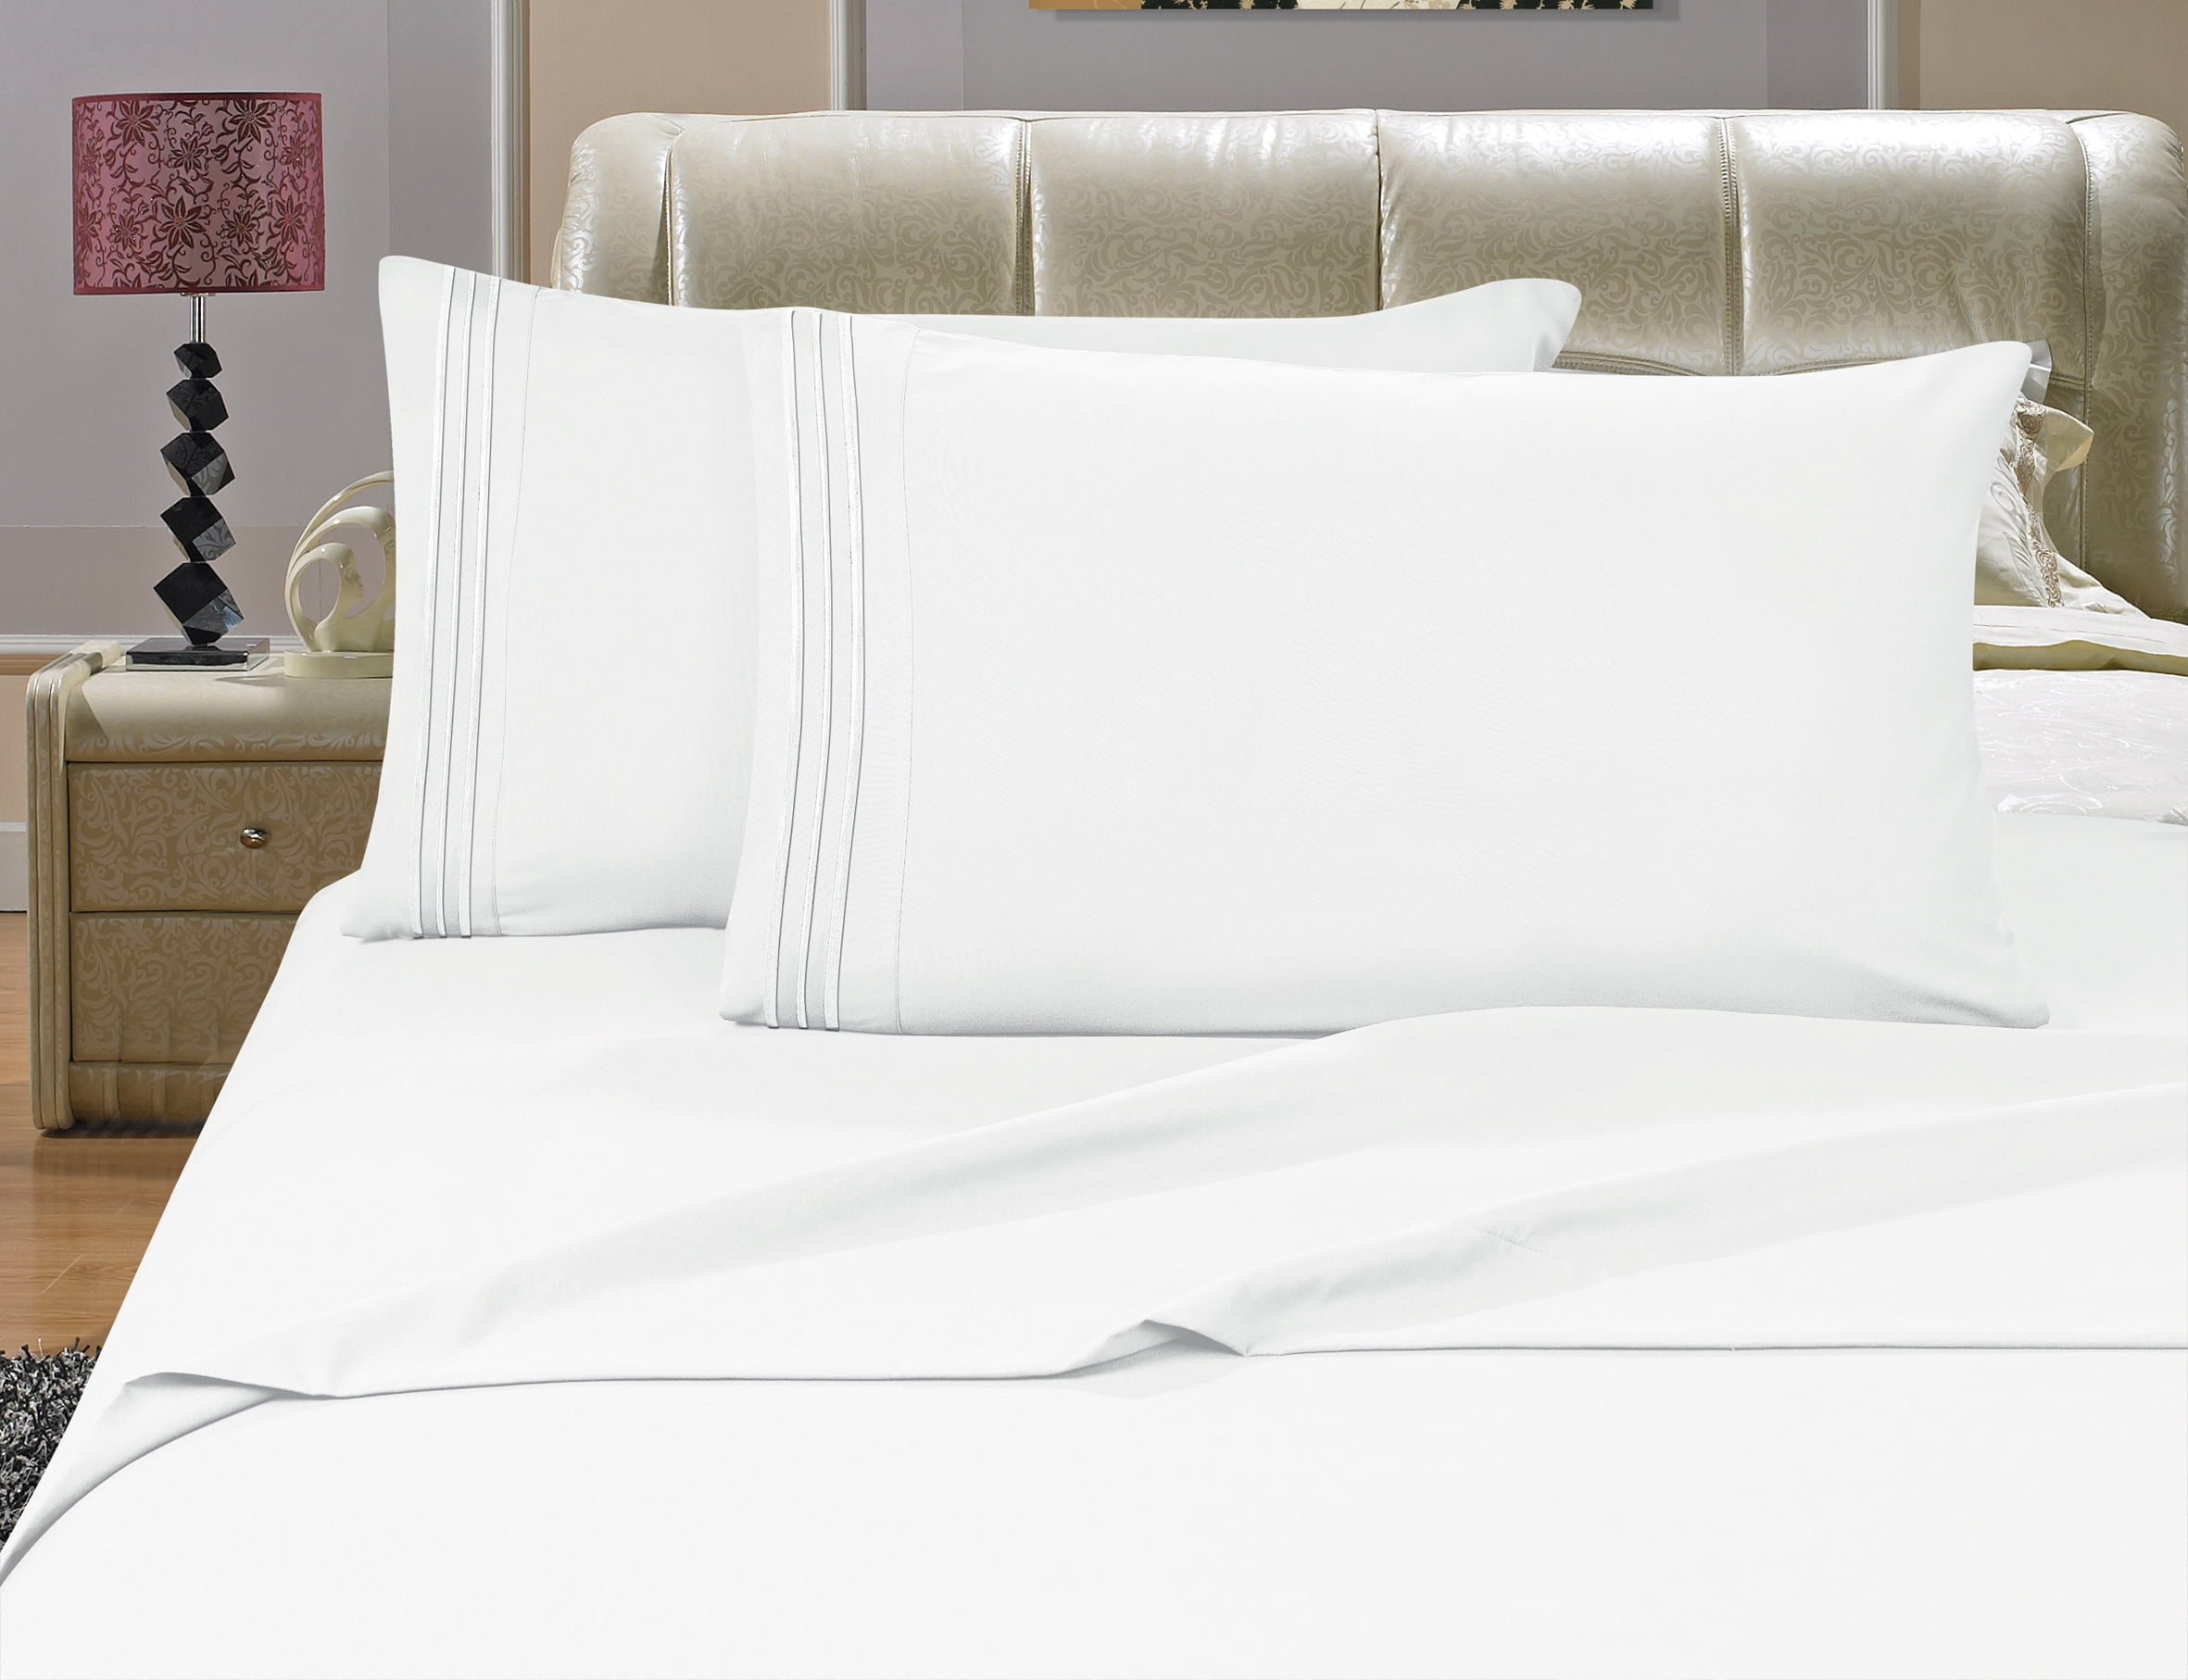 Details about   Elegant Comfort 81RW-3Line-Q-Lime Luxurious 1500 Thread Count Egyptian Three Lin 